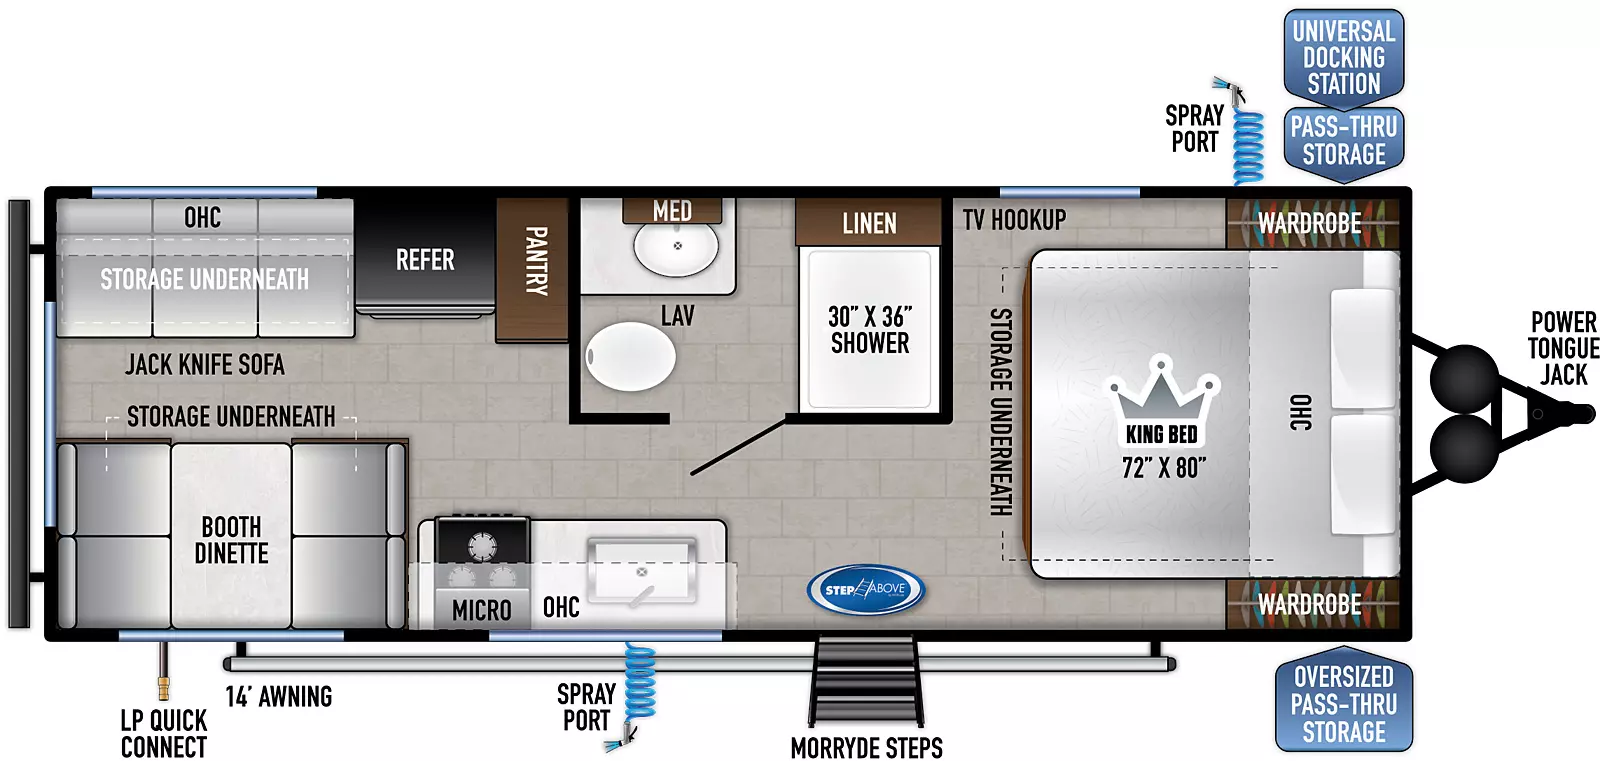 The 20KRD has zero slides and one entry door on the door side. Interior layout from front to back: front bedroom with king bed featuring overhead cabinets, bedside wards, TV hookup and underbed storage; aisle bathroom with solid privacy door, shower, linen cabinet, medicine cabinet above the sink and a porcelain toilet; kitchen living dining area features a residential sink, backsplash window on door side, 3-burner cooktop with oven and overhead microwave plus overhead cabinets, refrigerator and pantry across on off-door side, jackknife sofa with storage underneath in rear on off-door side; across is a booth dinette with storage underneath featuring picture window on door side. Exterior from front to back: Power tongue jack, oversized pass-thru storage on door side, universal docking station in pass-thru on off-door side with spray port; solid steps at entry door on door side, spray port mid-door side, LP quick connect in rear and 14' awning.